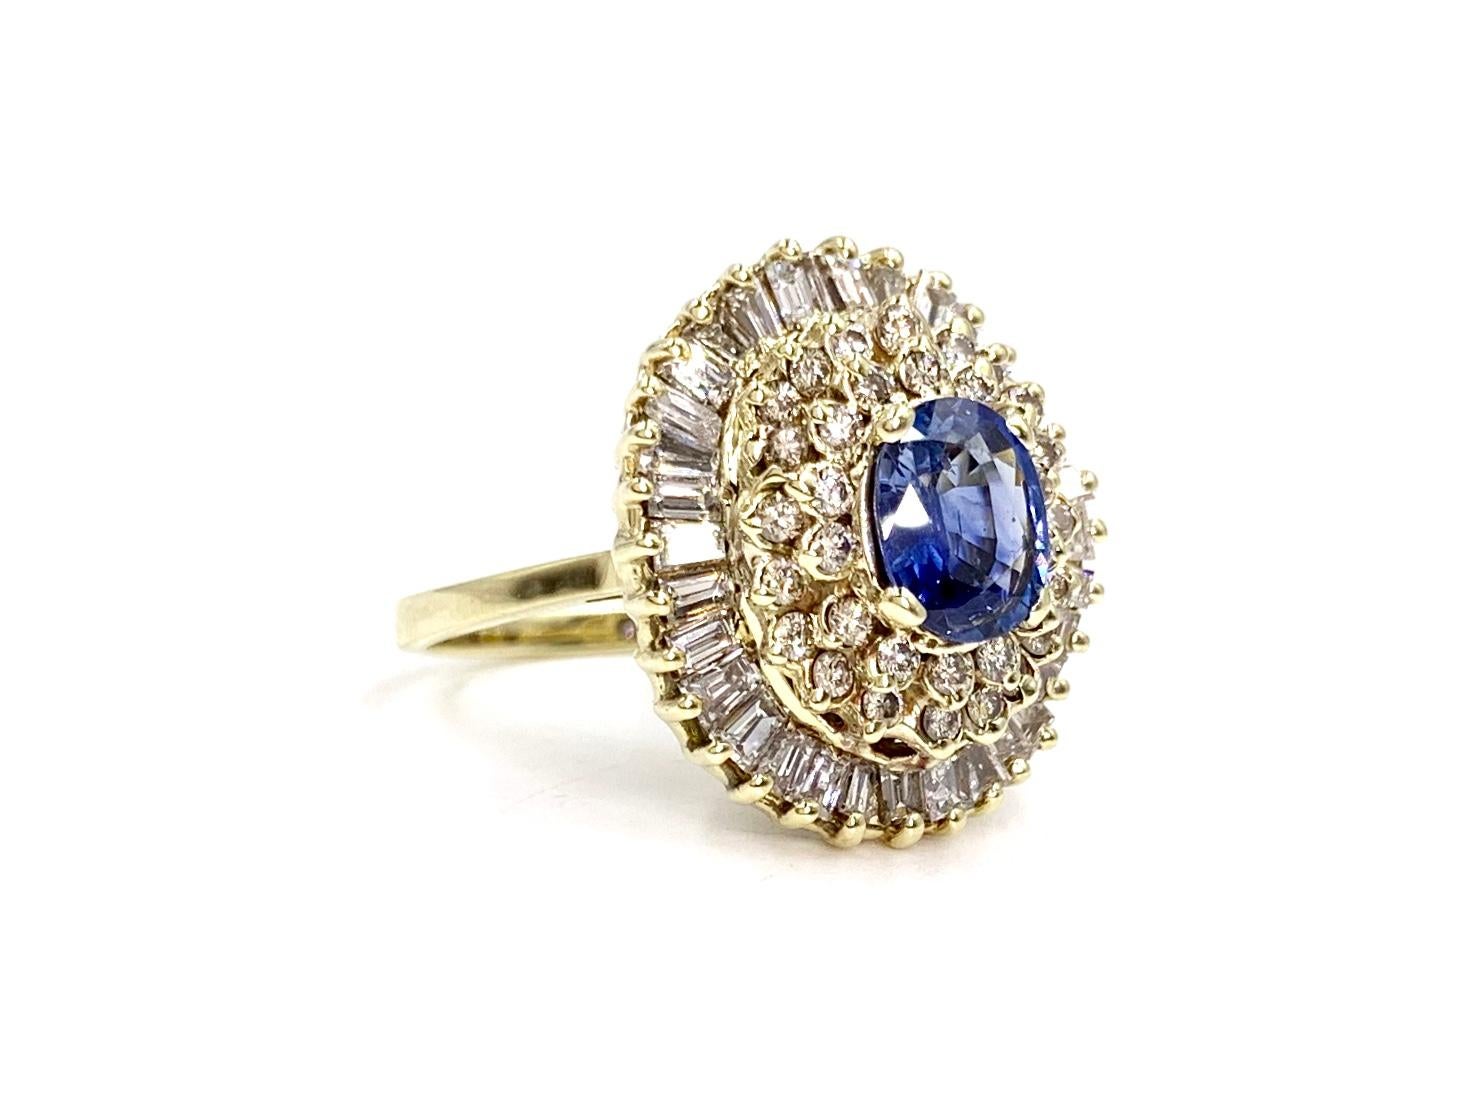 Vintage 14 karat yellow gold blue sapphire and diamond cluster style cocktail ring. Ring features a beautiful oval blue sapphire center, approximately 1 carat surrounded by approximately 1.60 carats of round brilliant diamonds and an outer halo of